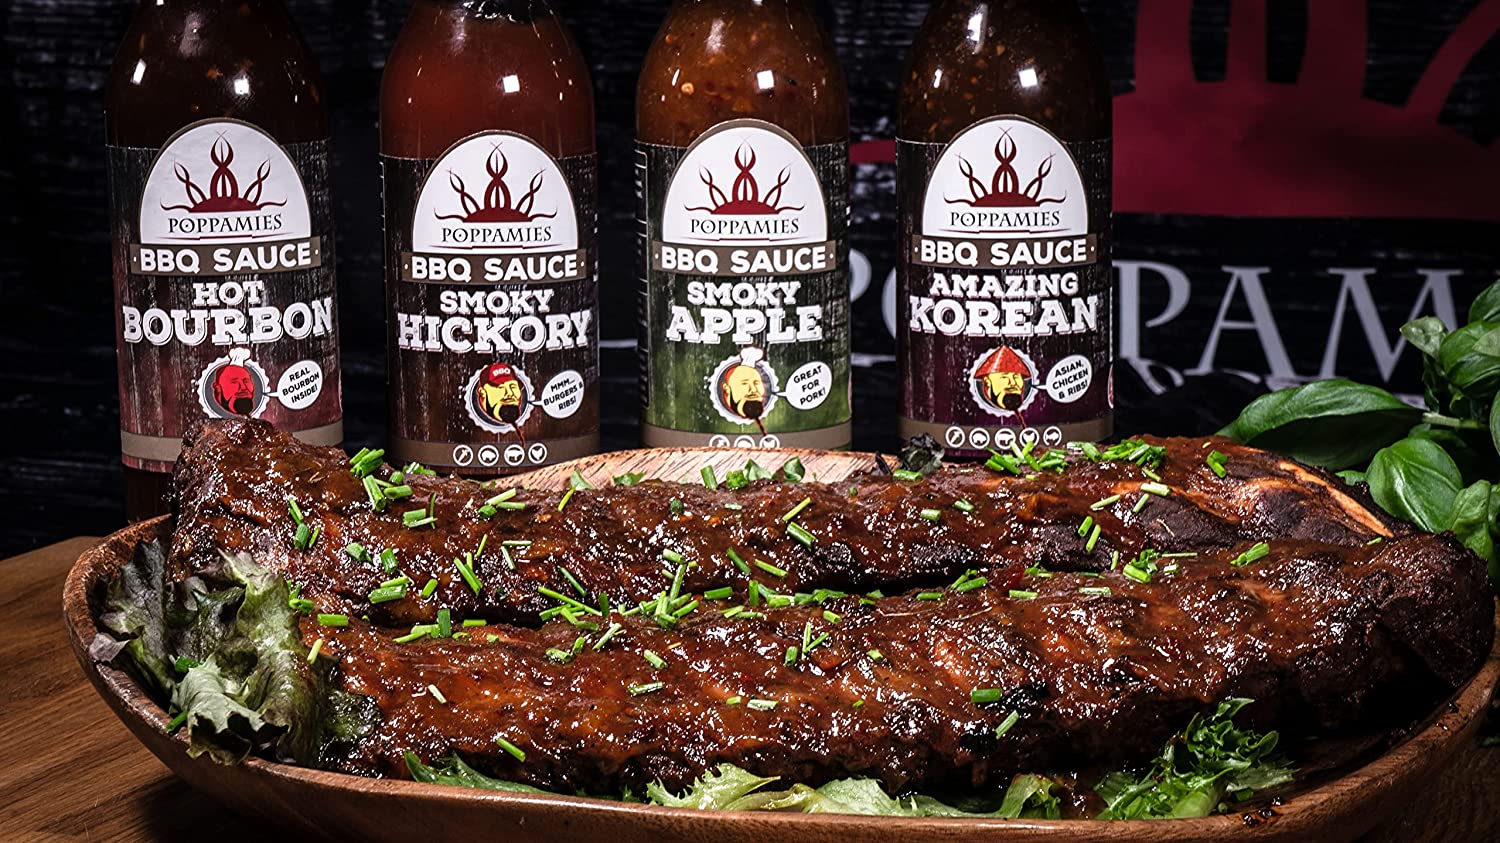 Poppamies BBQ Sauce Hot Bourbon - Well-suited for grilled food and burgers and for use as a dip and cooking sauce - Spiciness 6/10 - 410g - Lukata LTD